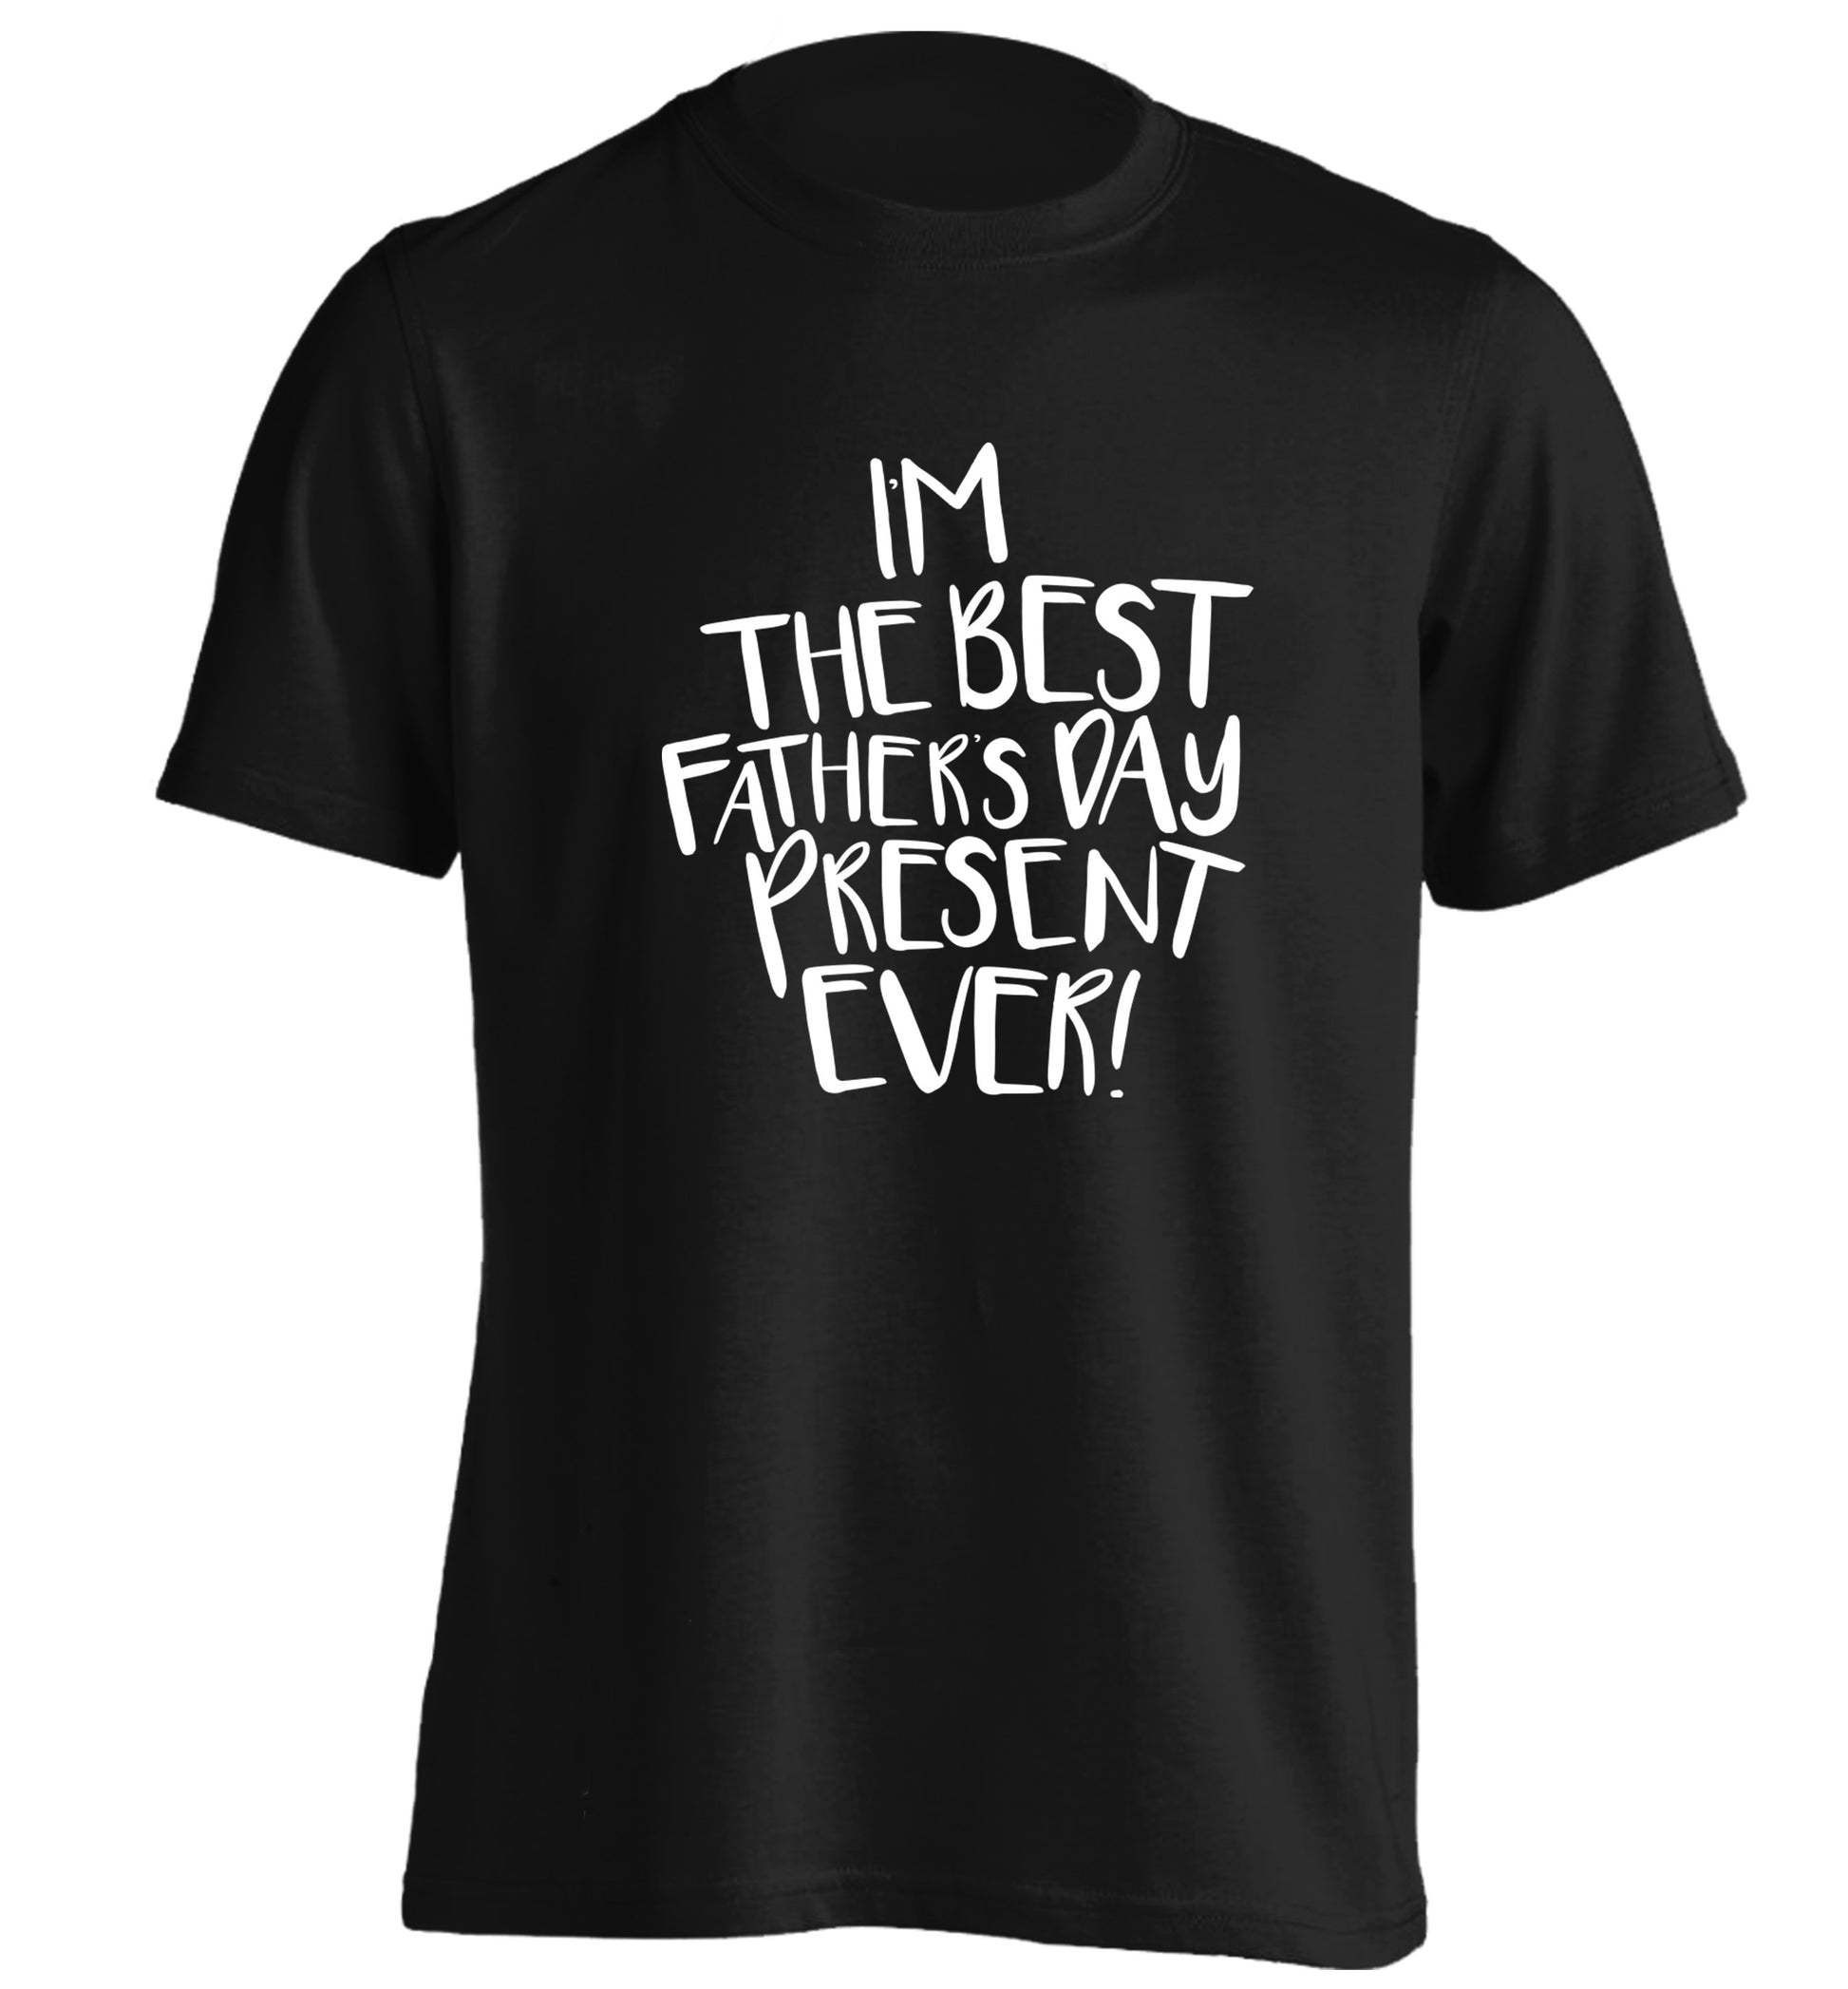 I'm the best father's day present ever! adults unisex black Tshirt 2XL